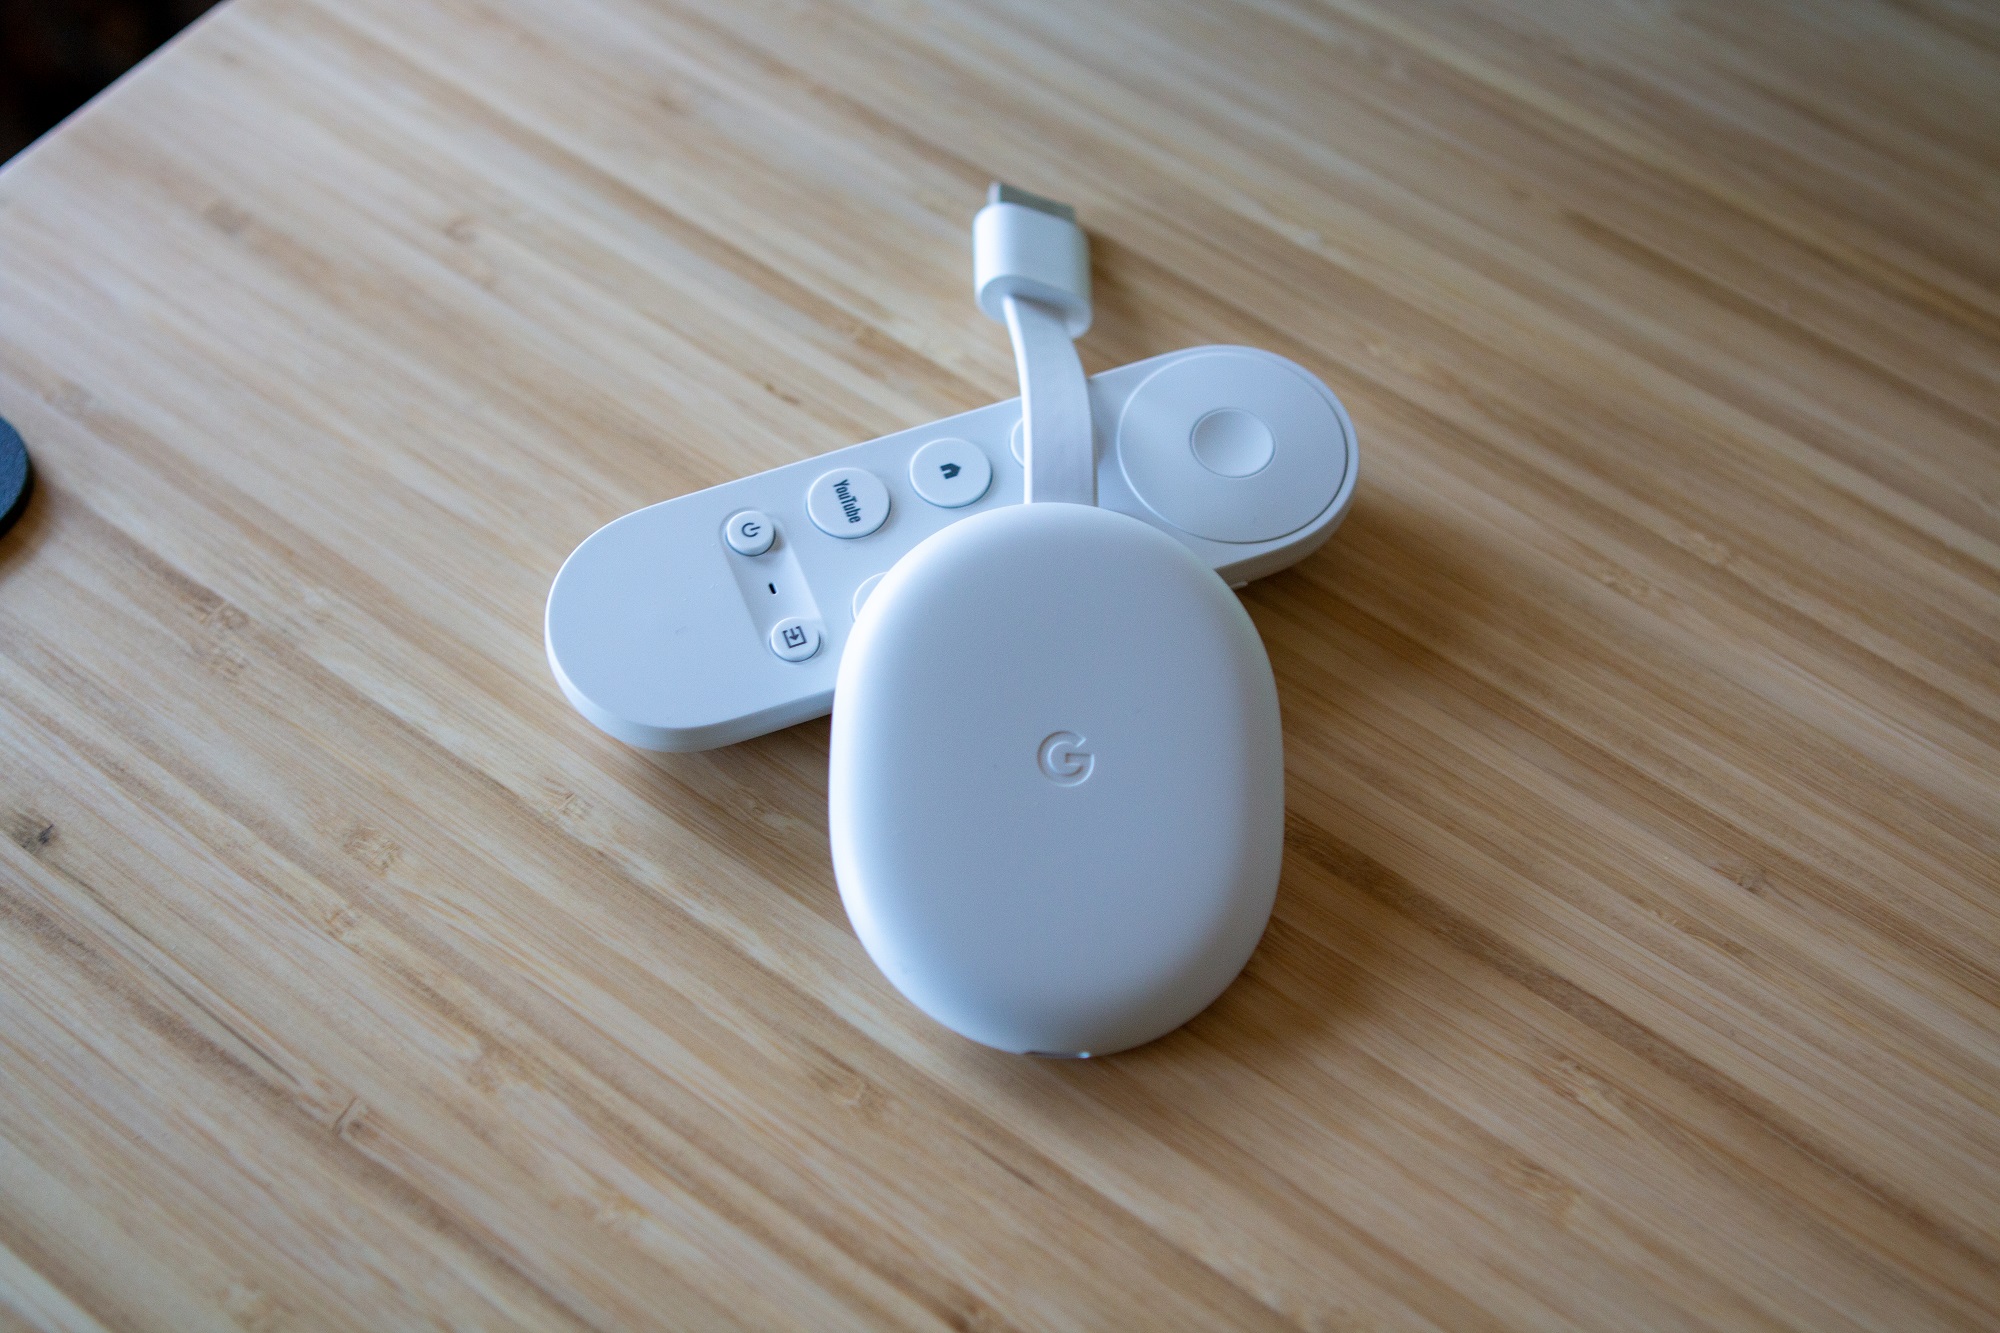 Google supposedly chipping away at another Chromecast dongle with Google TV